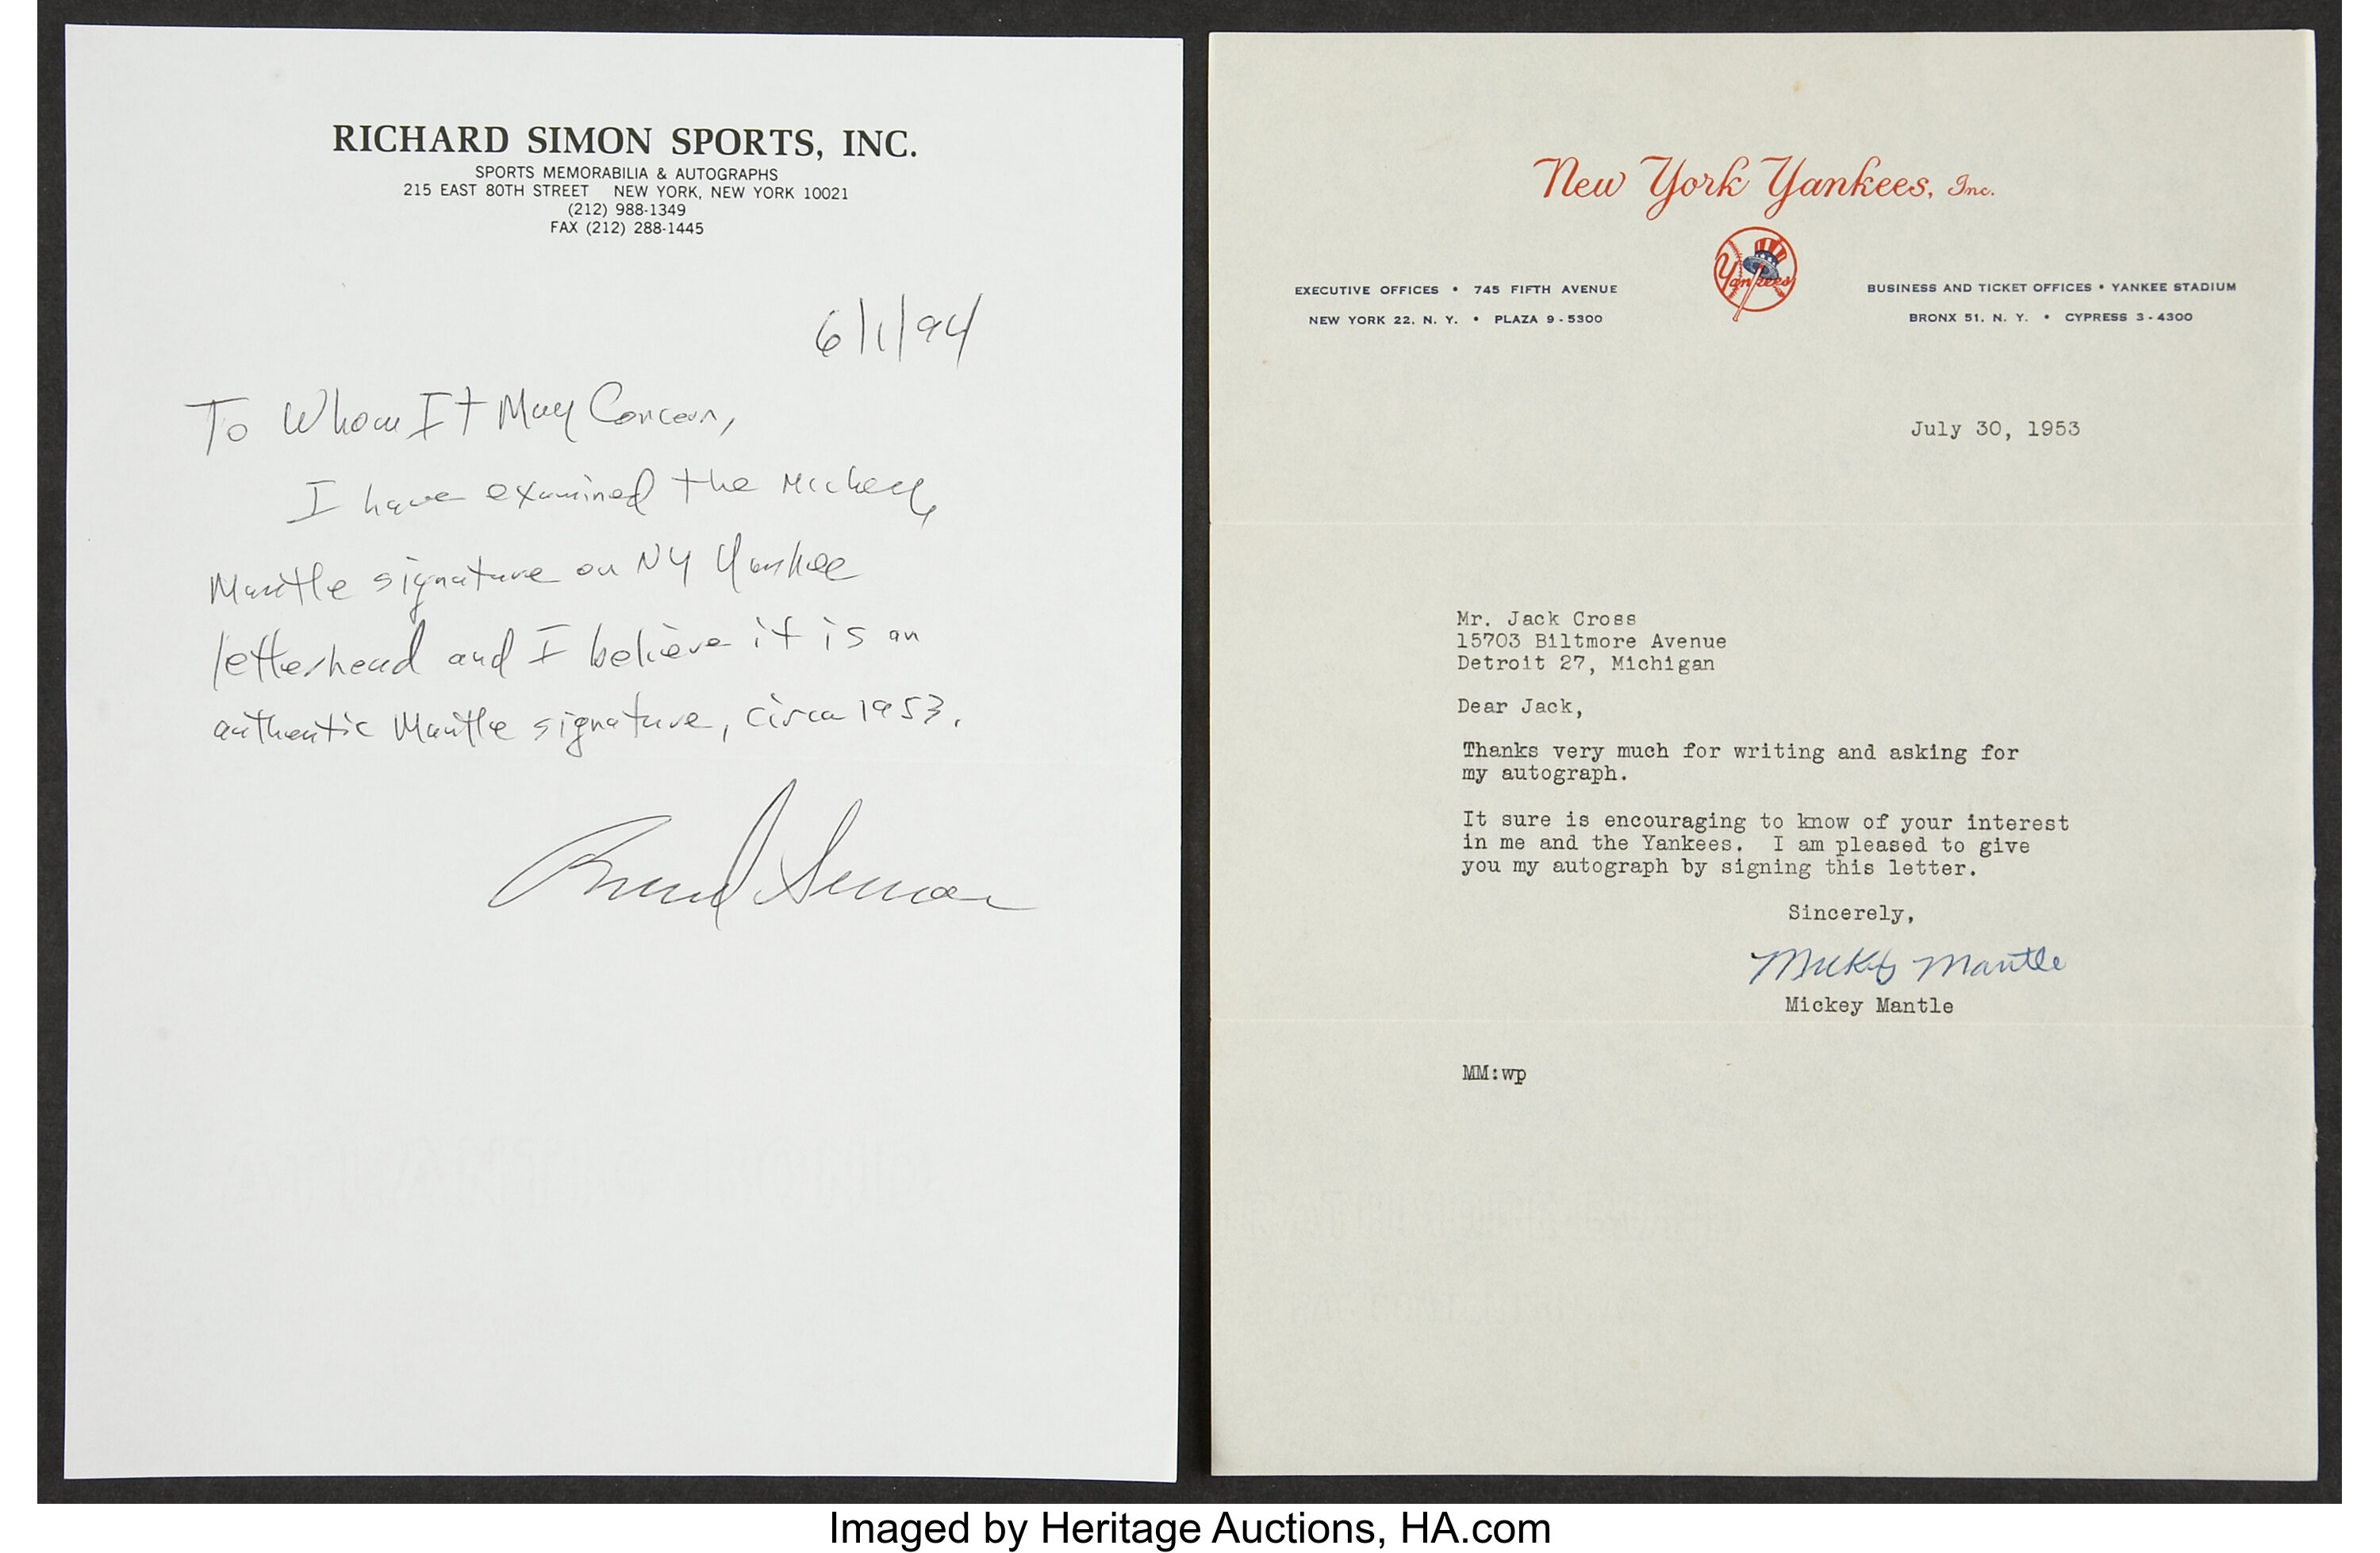 Letters from old Yankee Stadium up for auction